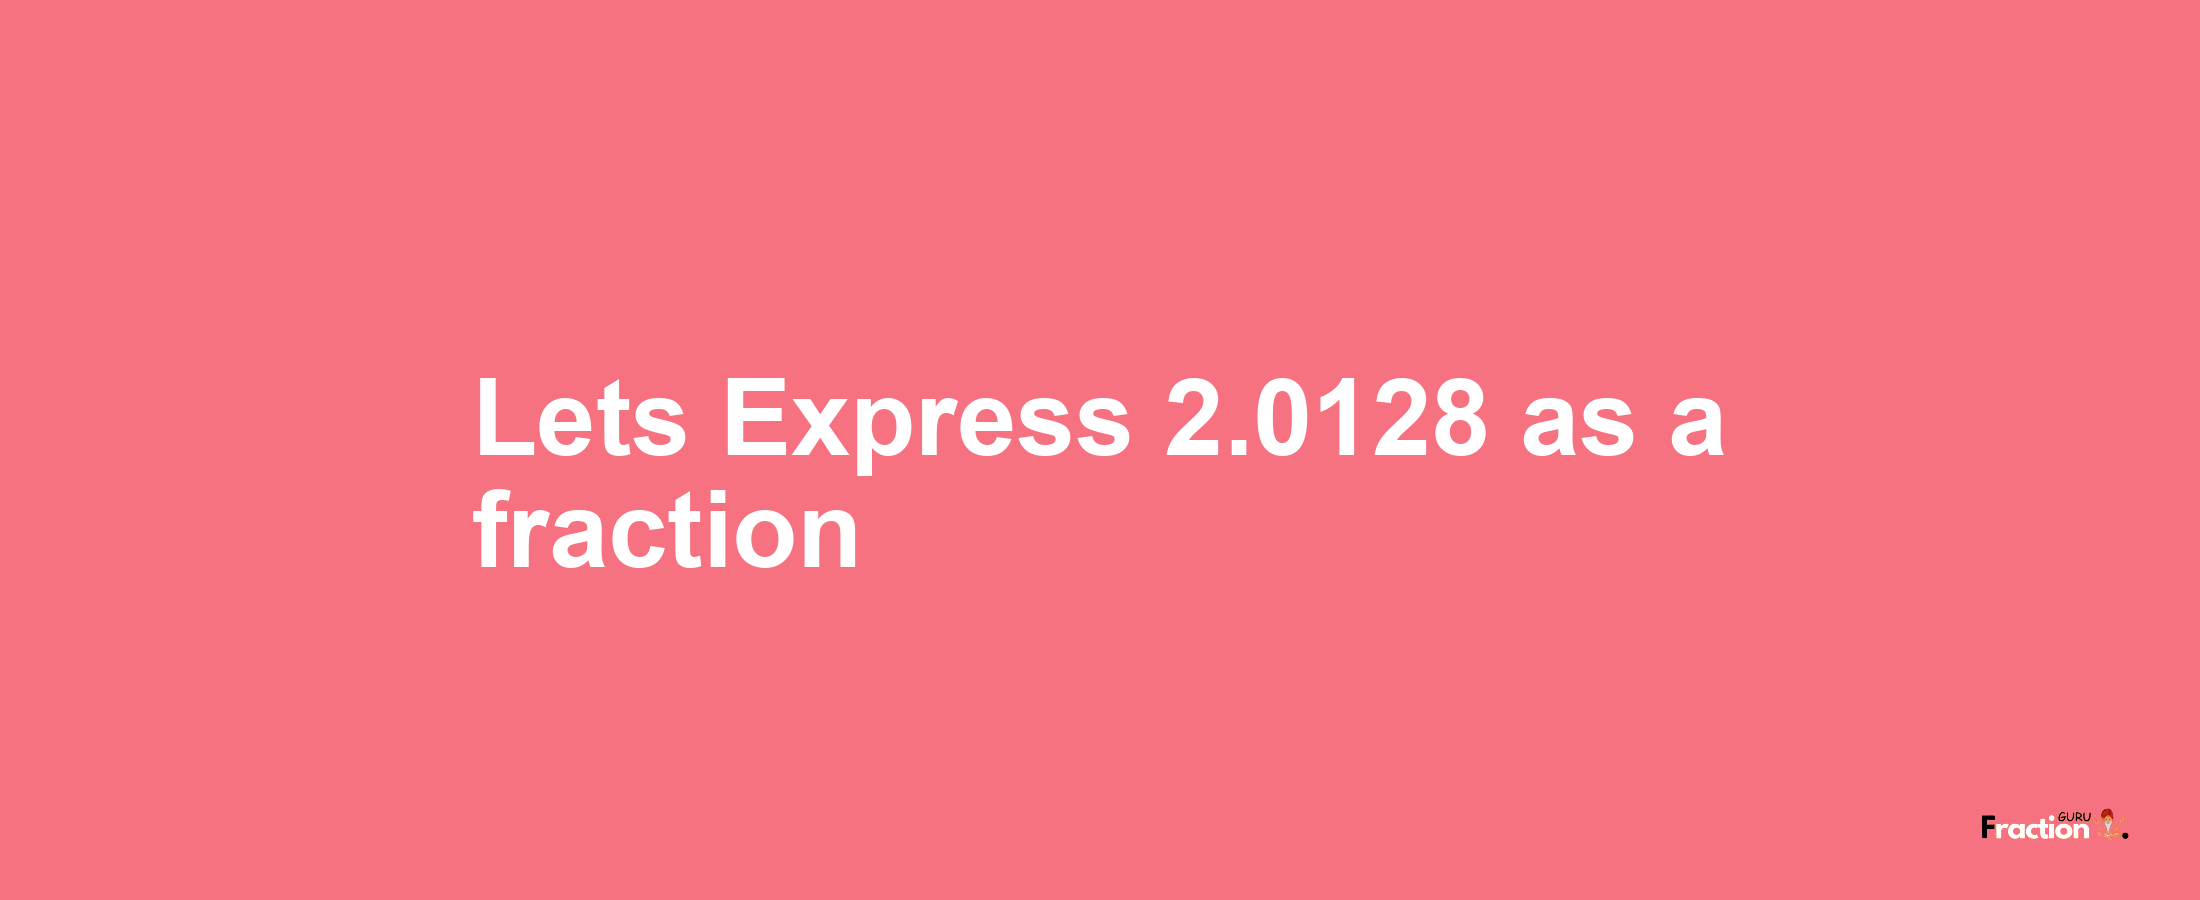 Lets Express 2.0128 as afraction